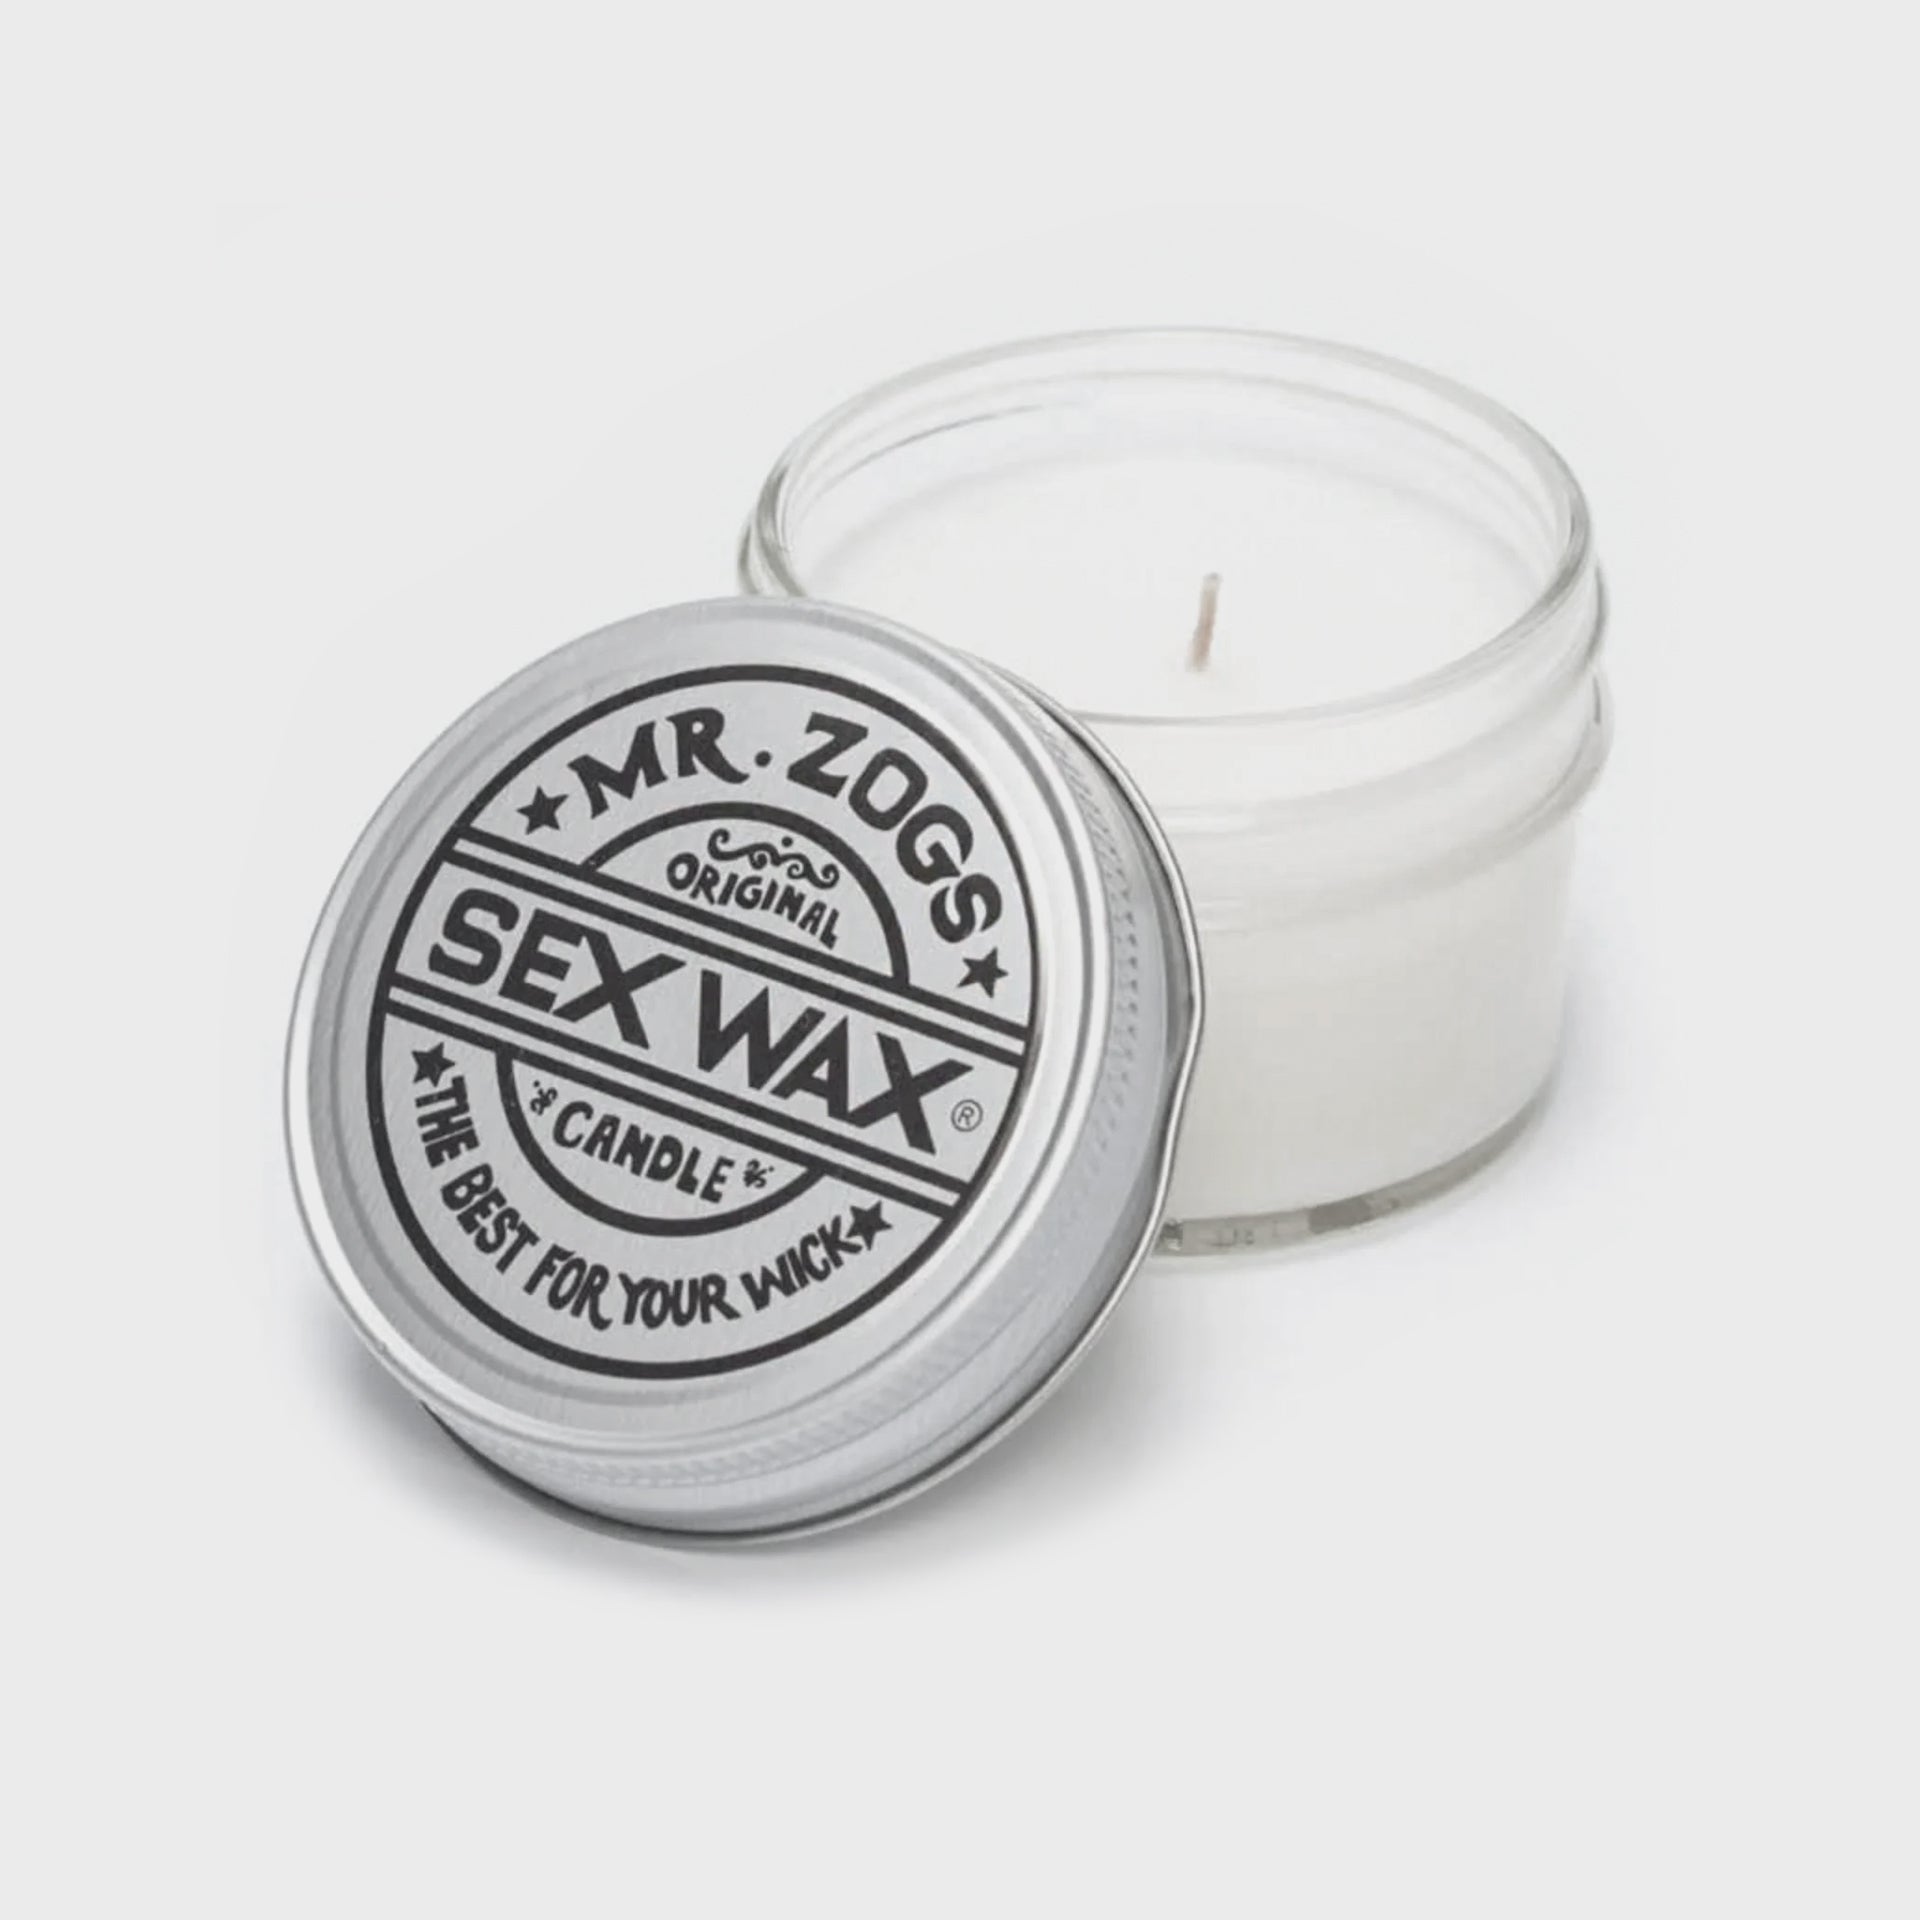 Sex Wax Candle - Assorted Scents - ManGo Surfing